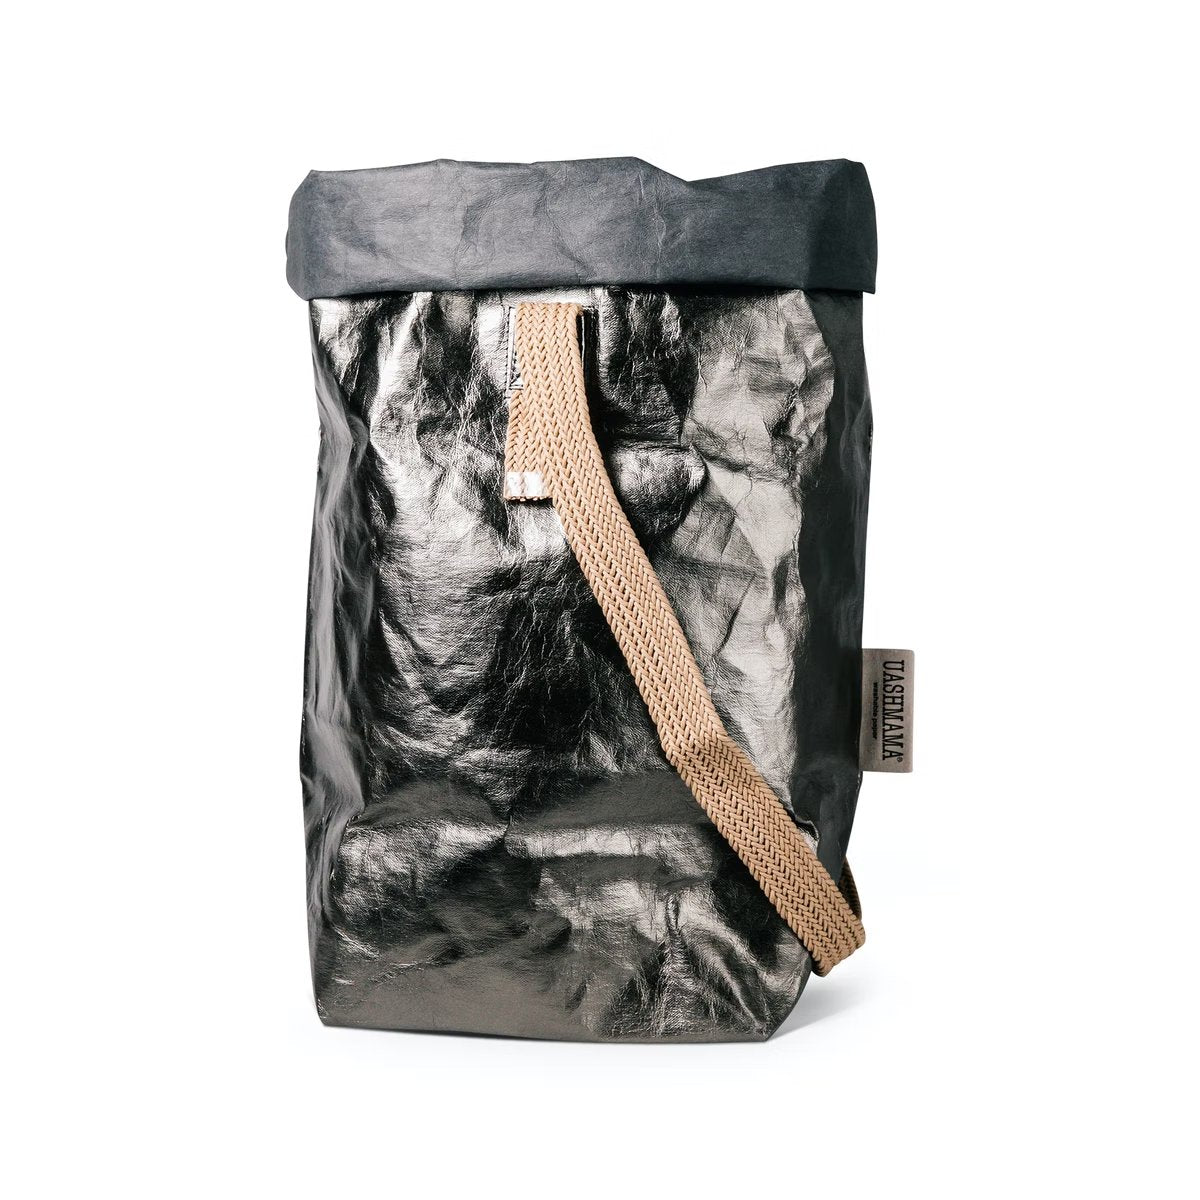 A pewter metallic washable paper bag with a single cotton carry strap in a natural tone. The top is displayed open and rolled down, with a natural toned UASHMAMA logo tab on the right hand side.